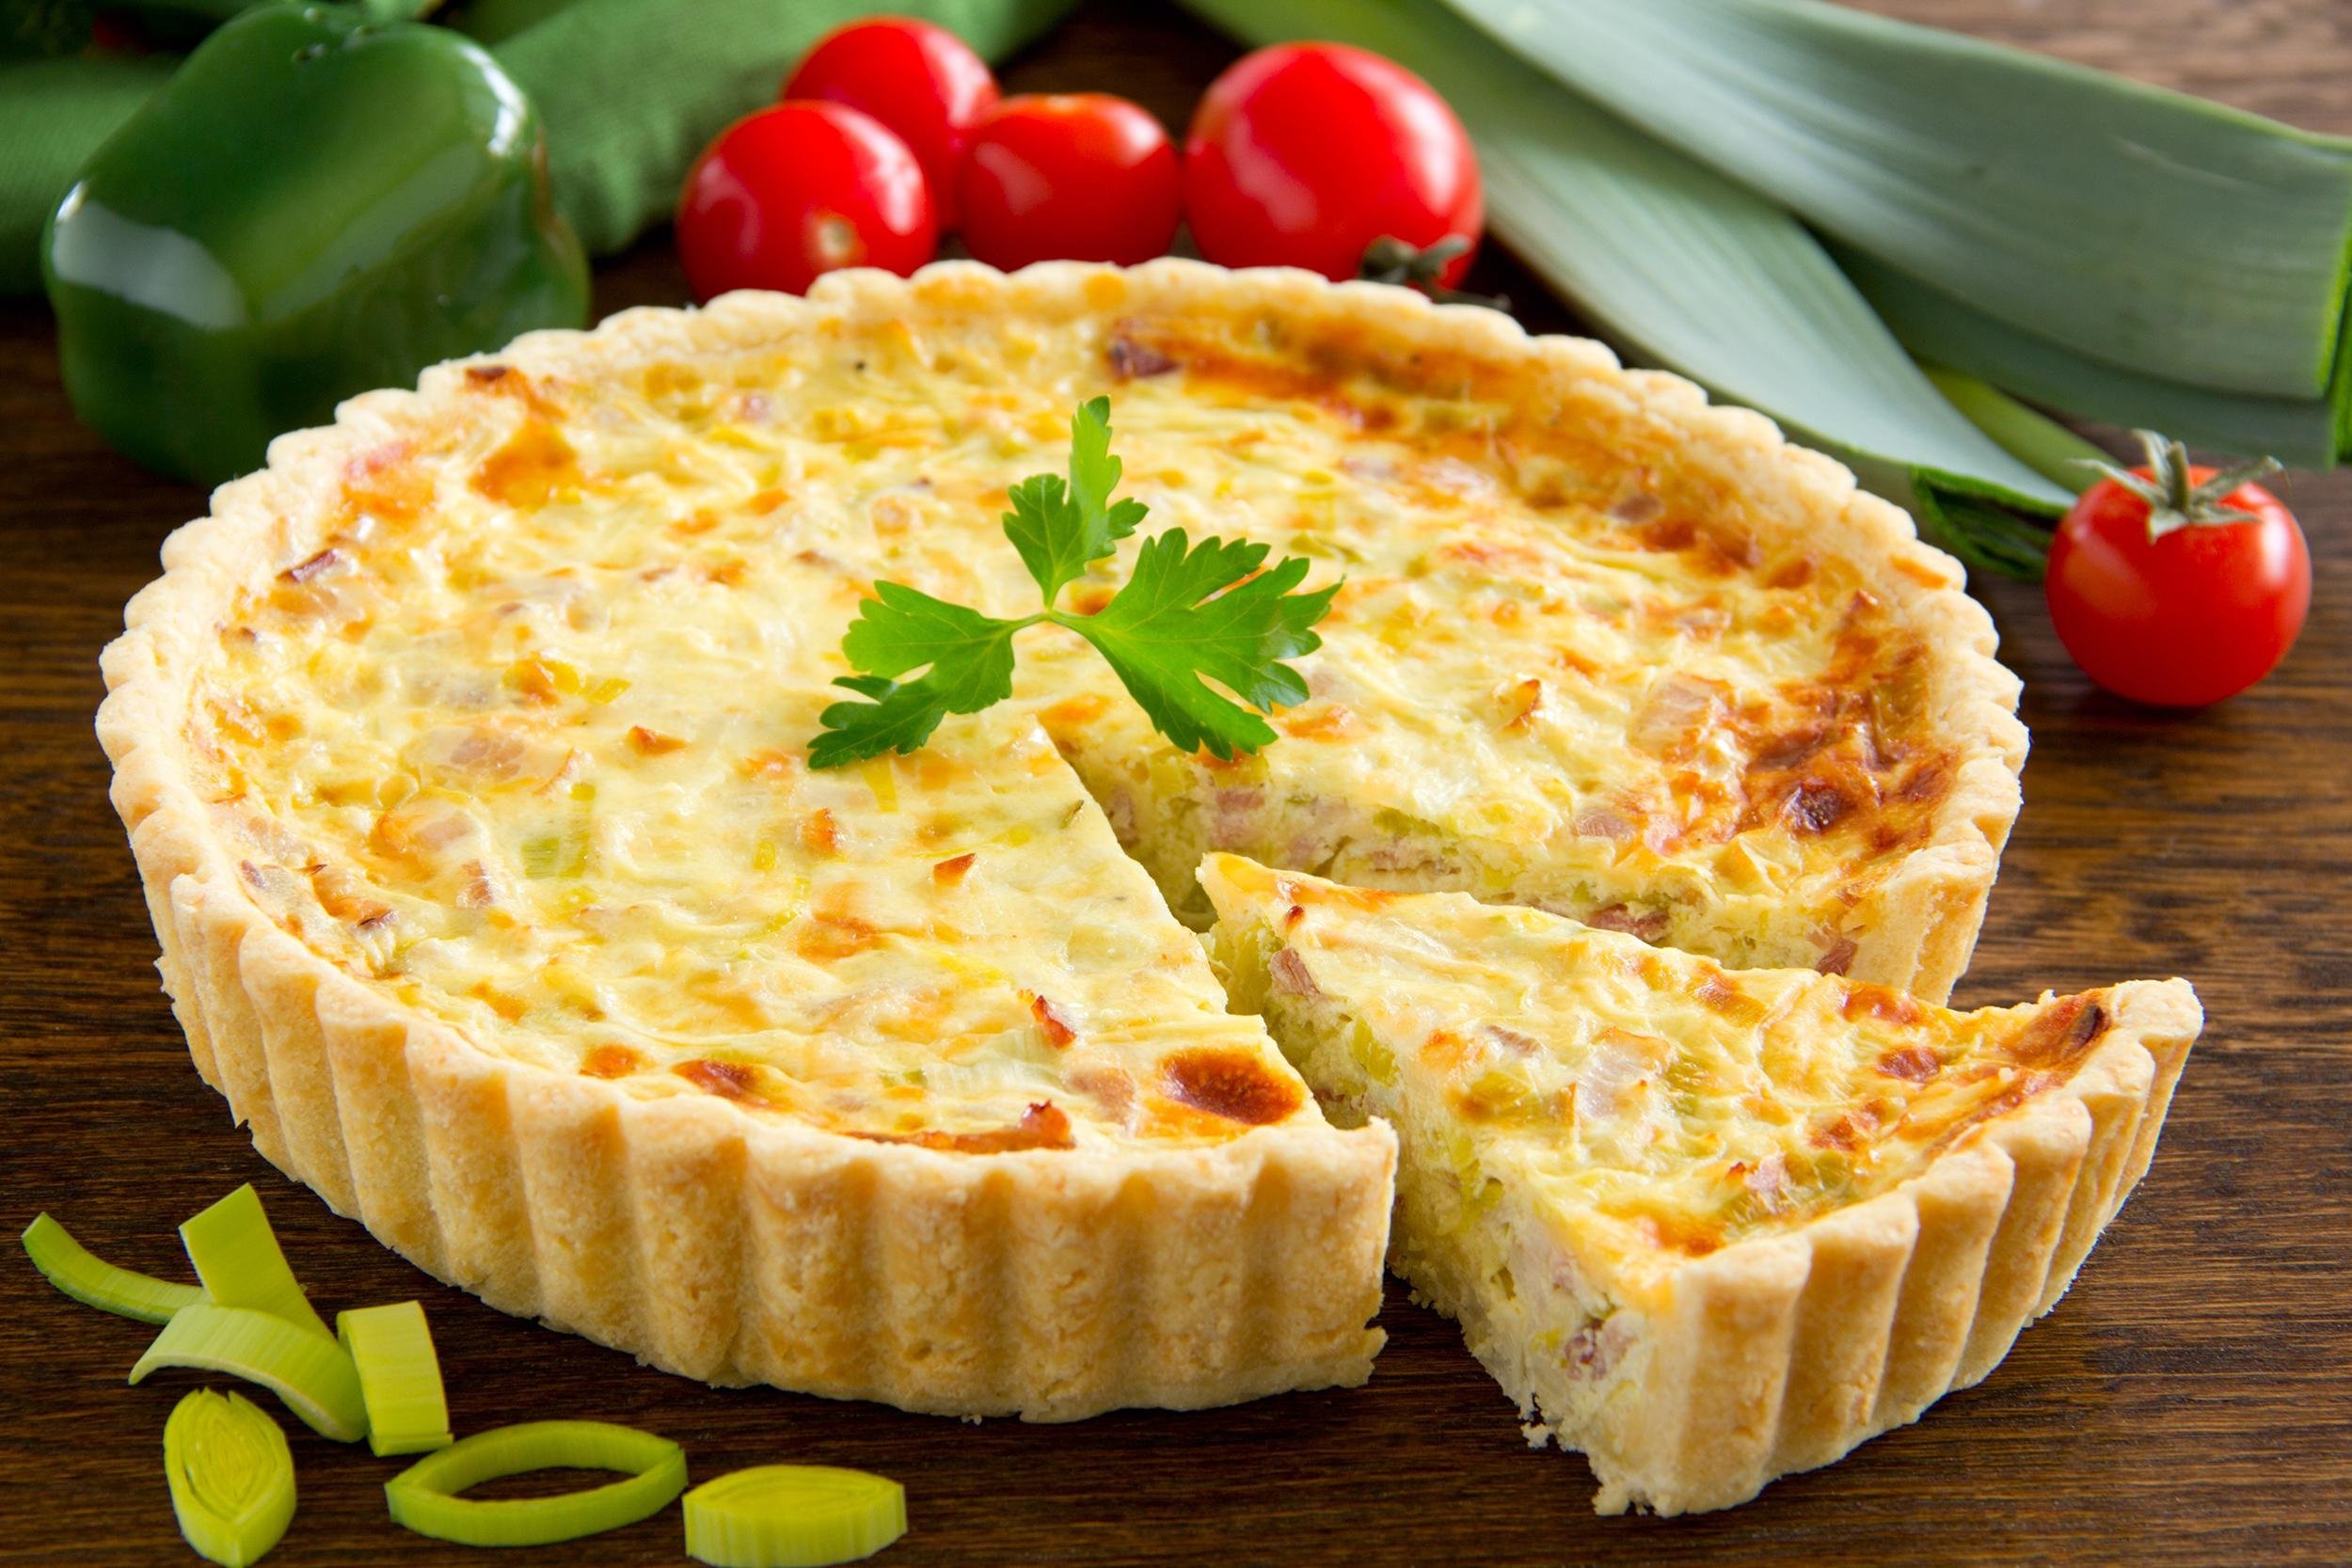 <p>Don't let the <a href="https://blog.cheapism.com/cheap-classic-french-dishes-14097/">fancy French name</a> fool you; a quiche is simply a delicious egg and cheese pie, which is easy to make with crispy <a href="https://blog.cheapism.com/cheap-and-easy-pie-recipes-for-national-pie-day-15471/">store-bought pie crust</a>. While preheating the oven to 425 degrees, beat together four eggs and 1 cup milk or cream in a mixing bowl. Be sure to beat them well, or else the quiche will have a dense texture. Add 1 teaspoon salt, 1 teaspoon onion powder, and one-half teaspoon cayenne pepper, and beat again. Sprinkle 1 cup shredded cheddar cheese over the bottom of a 9-inch pie crust and pour the contents of the bowl carefully over it. (Although a different type of shredded cheese can be used to cook a quiche, a good, sharp cheese is preferable; mild cheeses are more likely to be overwhelmed by the other ingredients.) Put the pie on the center rack of the oven and bake for 15 minutes. Then, turn the oven down to 300 degrees and bake for another 35 minutes until crispy. After baking, let the baked quiche sit an additional 10 minutes before eating. This dish is perfect with salad for lunch or dinner, not just breakfast, and can also be a tasty meal the next day when heated in the microwave.</p>